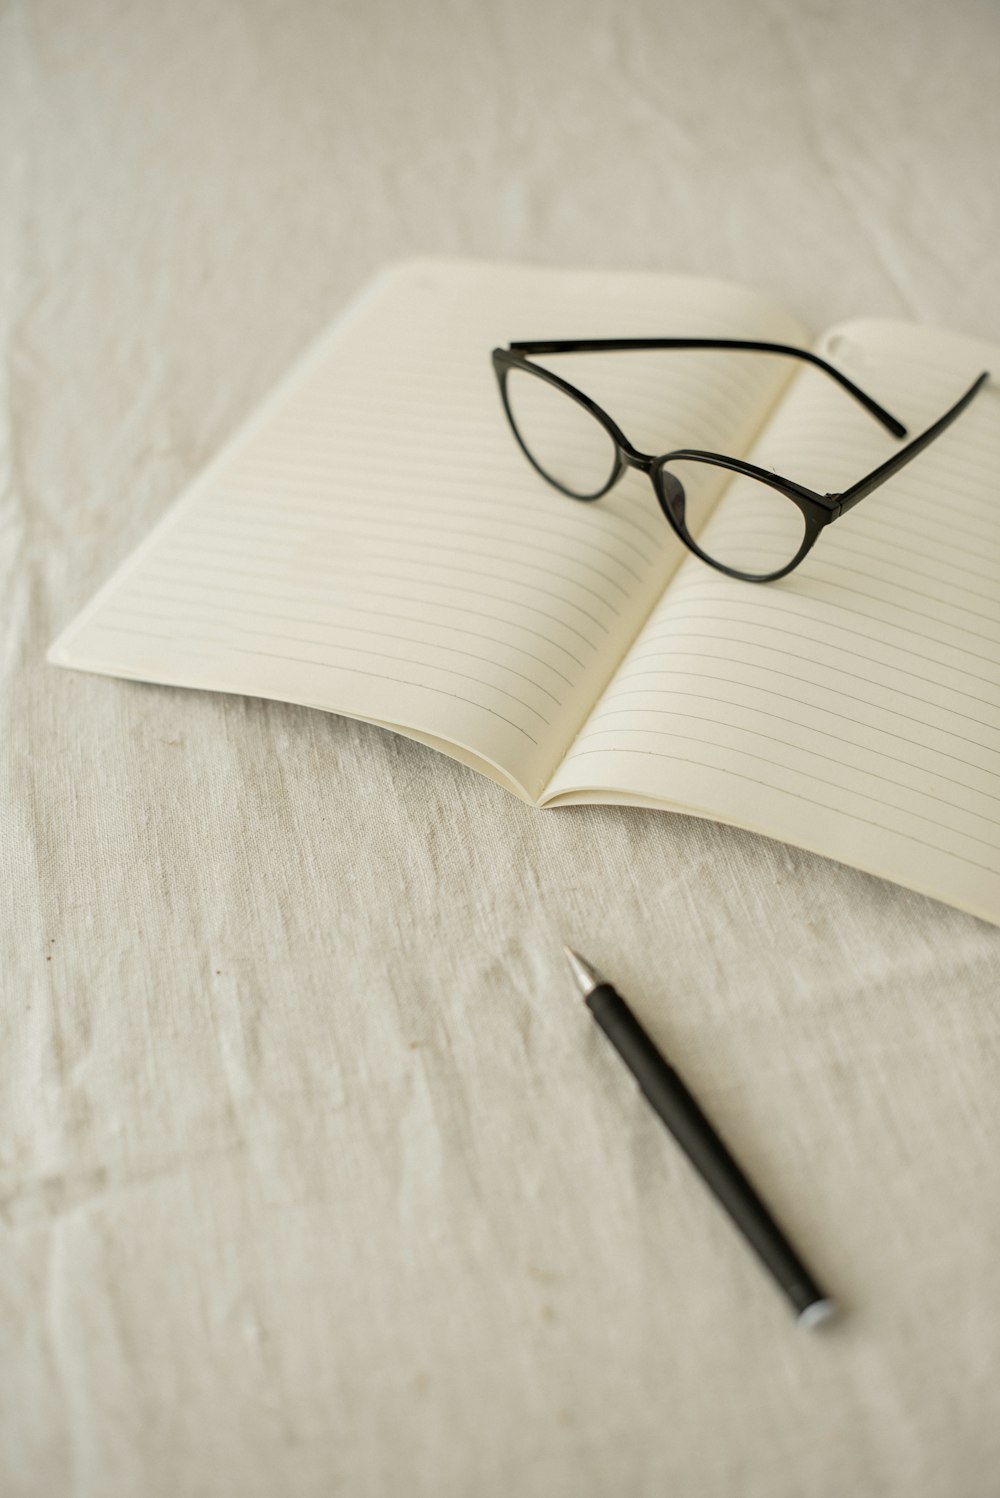 a notebook with a pair of glasses on top of it